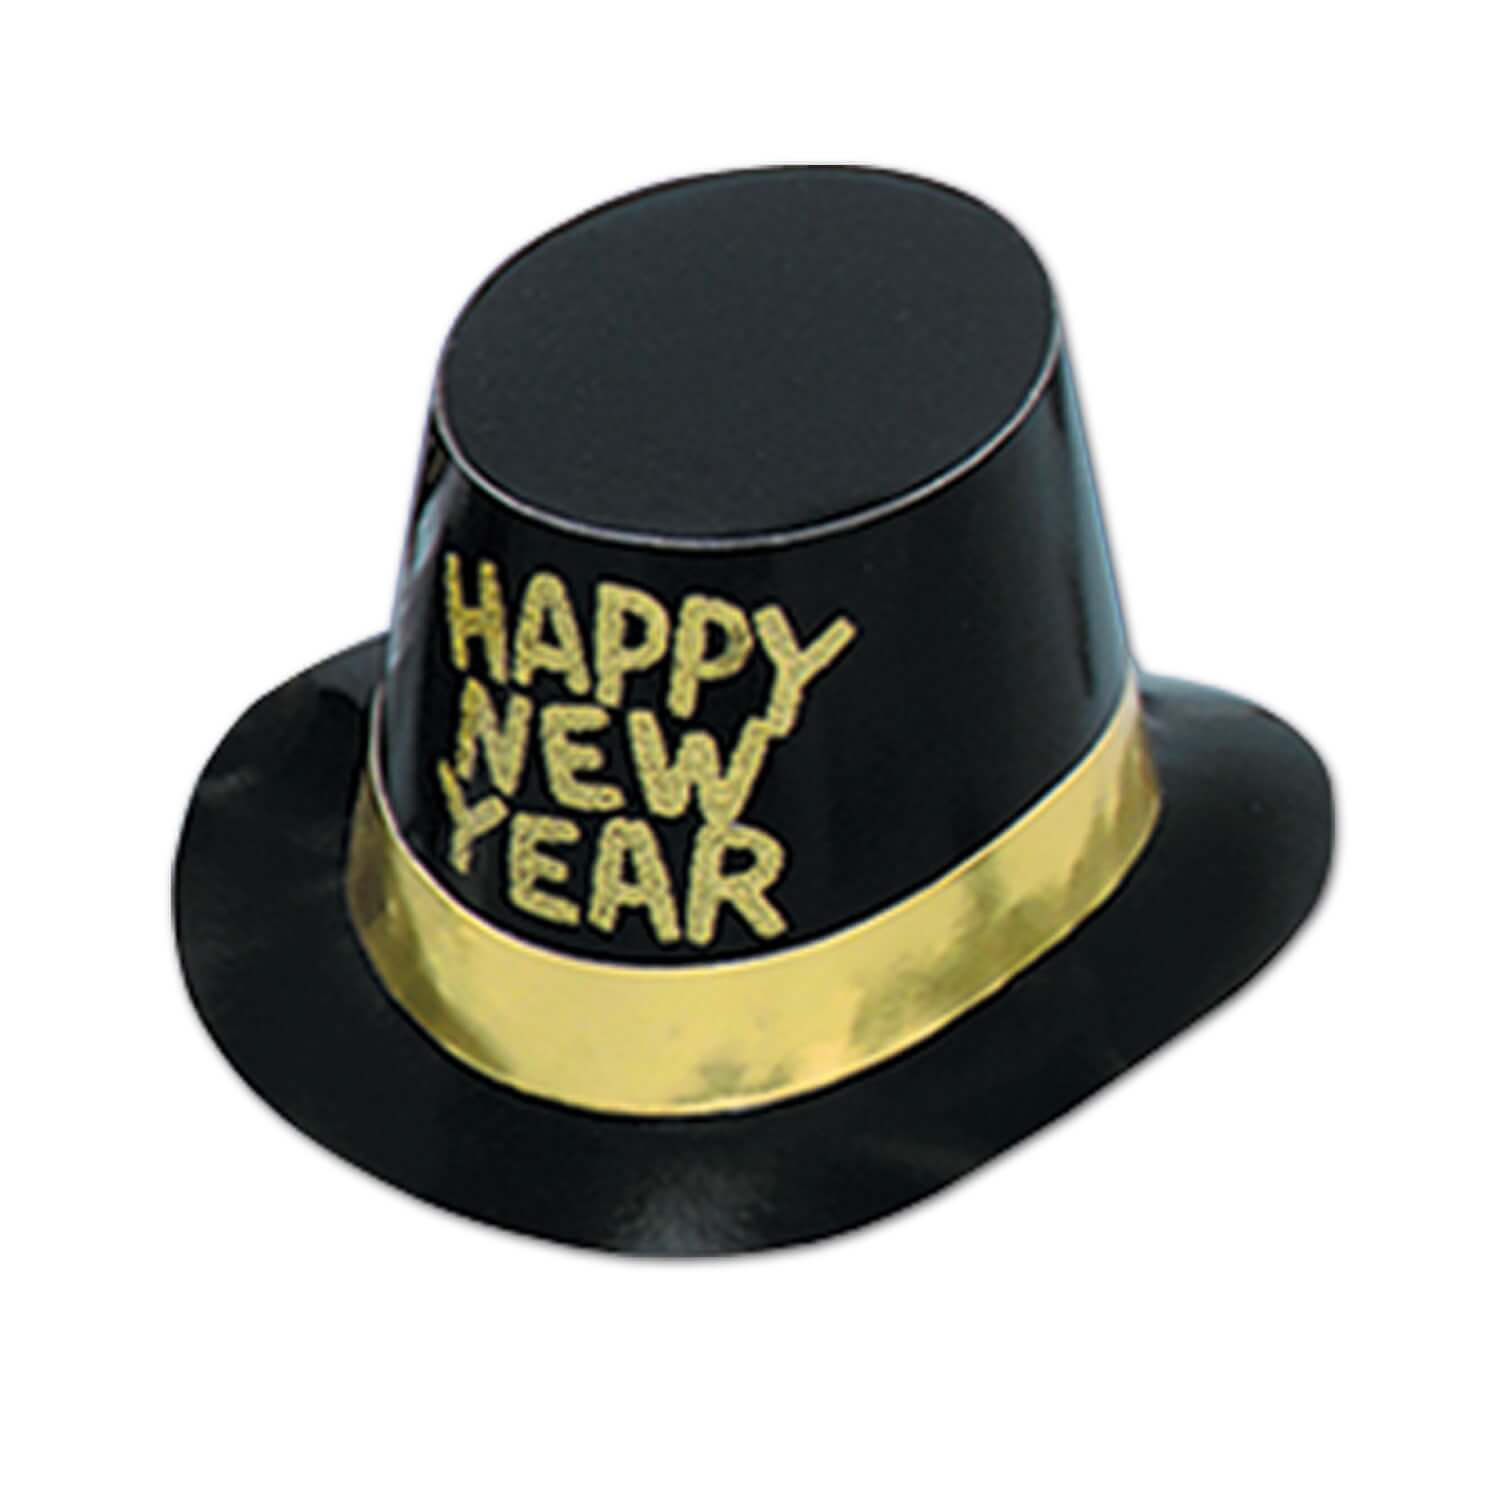 Black hi-hat with a gold band and gold glitter words that read "Happy New Year".